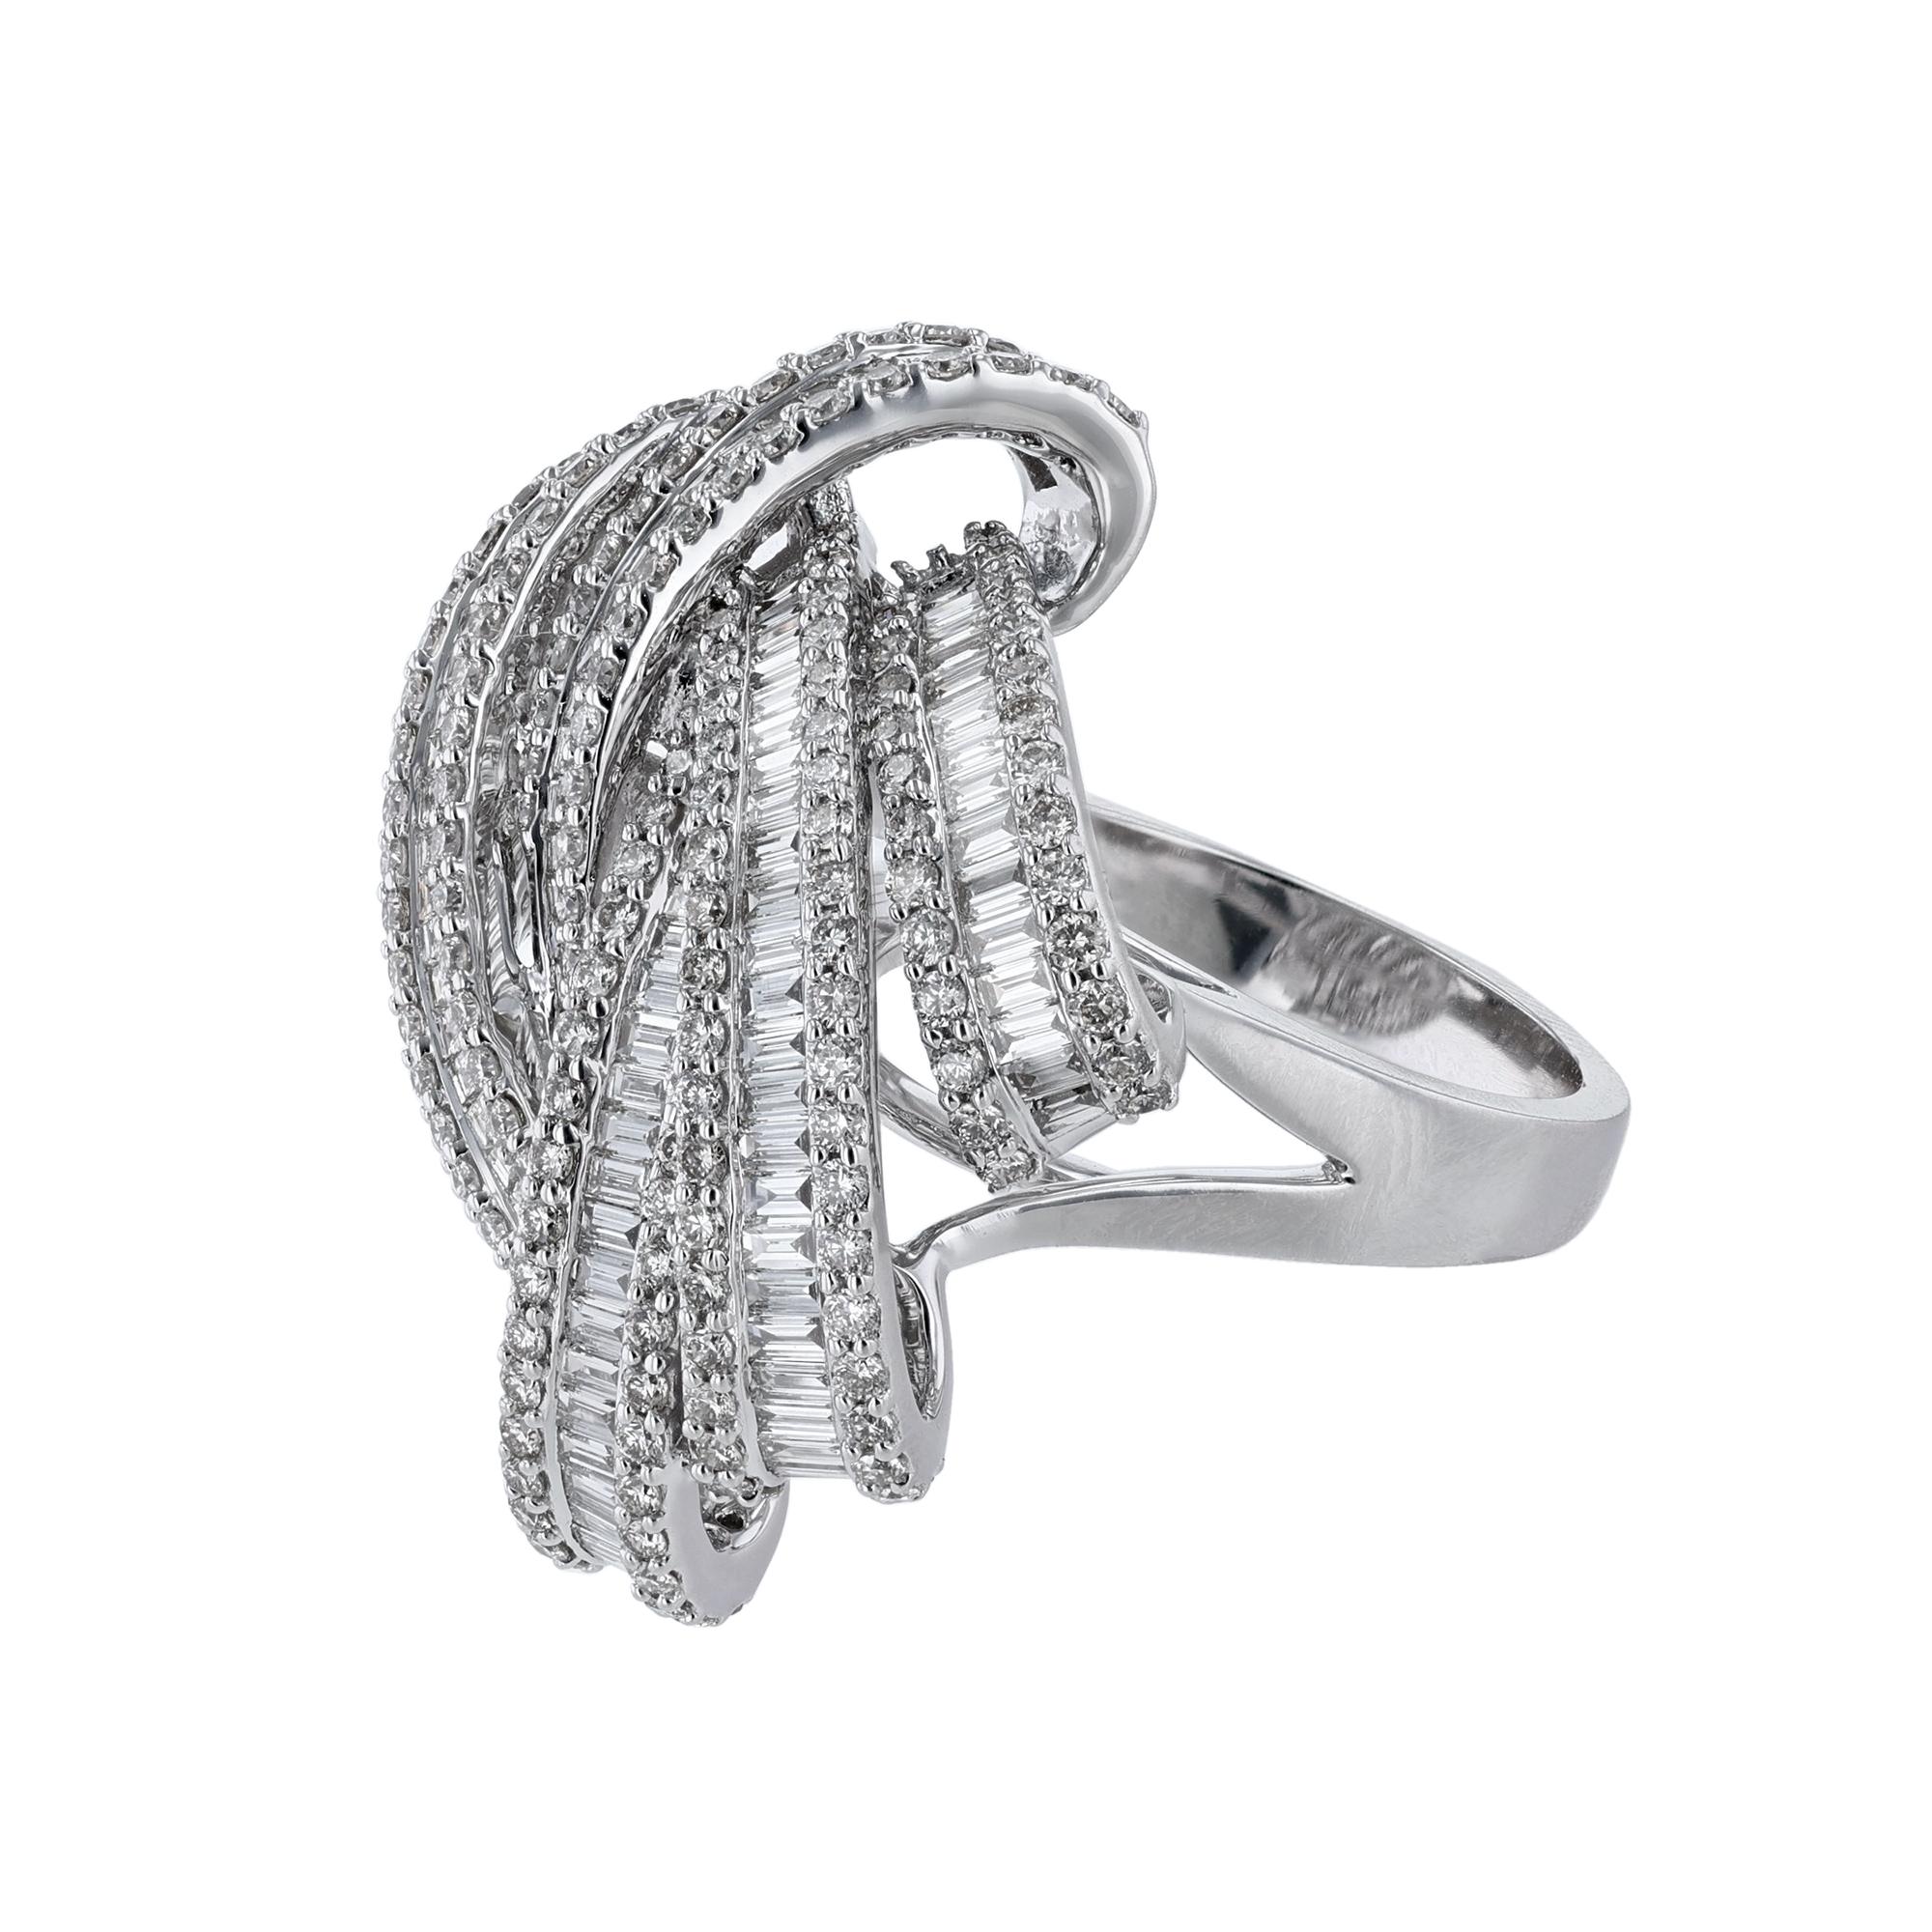 This ring is made in 18K white gold. It features 197 round cut, prong set diamonds weighing 1.64 carats. Along with 121 tapered baguette cut, channel set diamonds weighing 1.99 carats. With a color grade (H) and clarity grade (SI2). 

